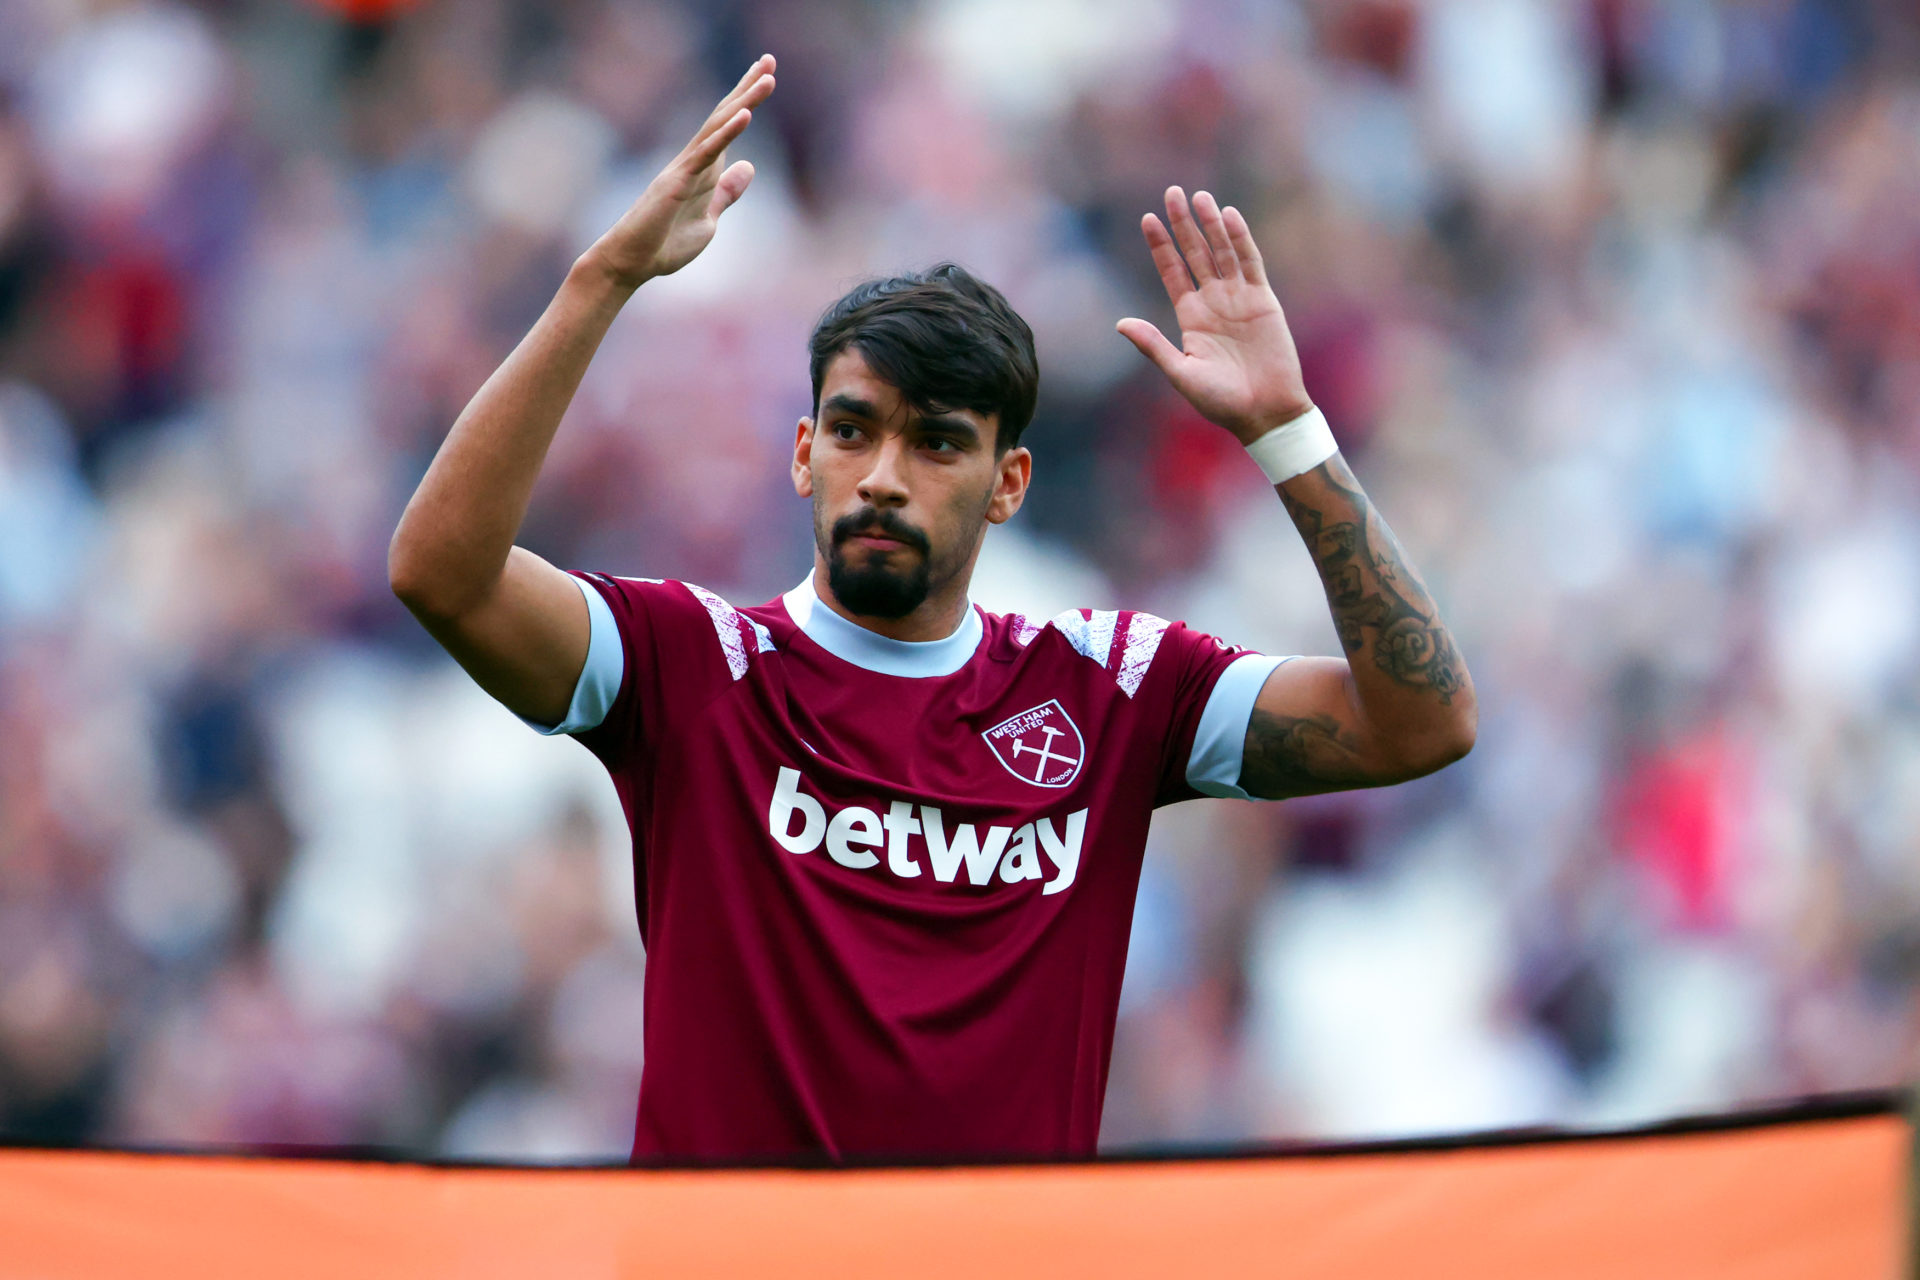 ‘Very limited’: David Moyes shares Lucas Paqueta language barrier issue